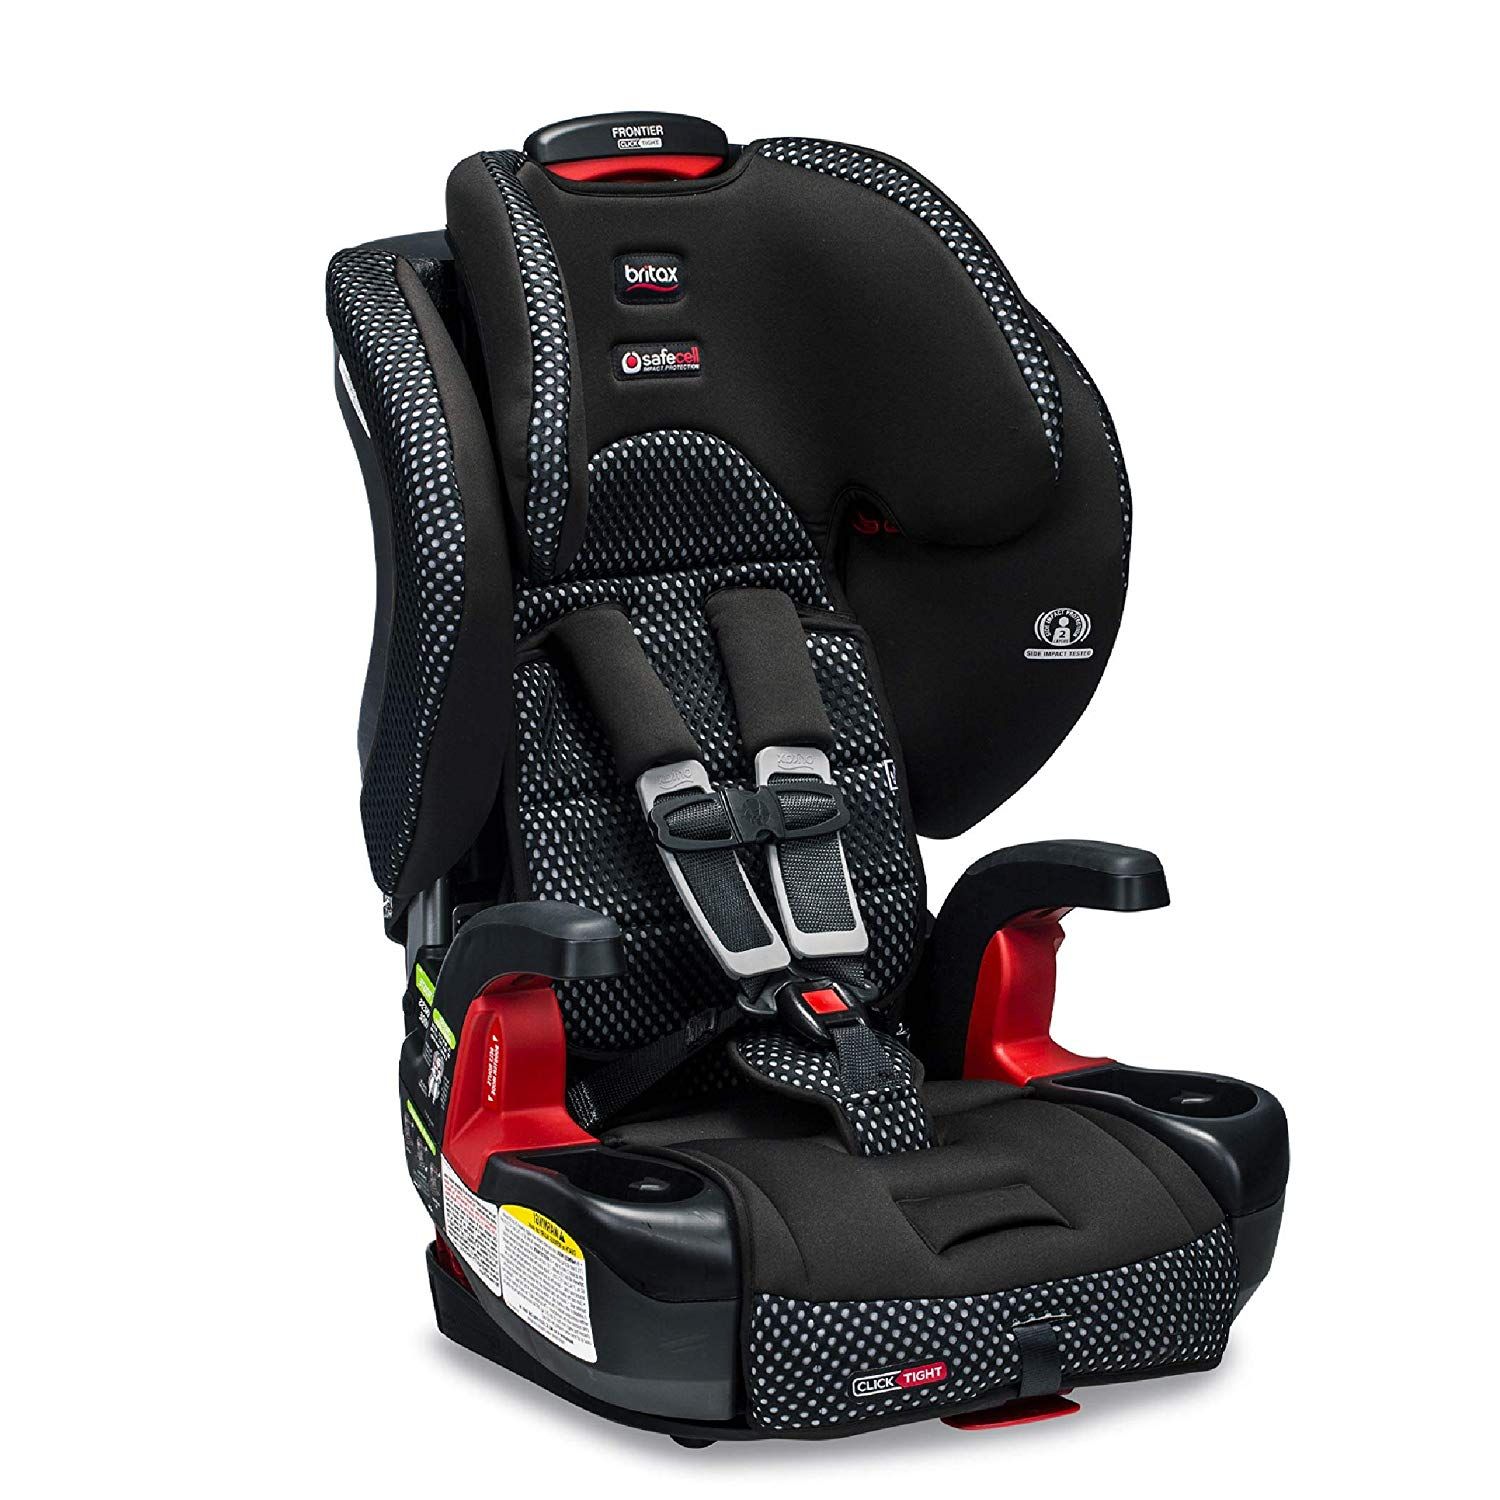 Best Toddler Car Seats Buyers Guide 2020 — ReviewThis